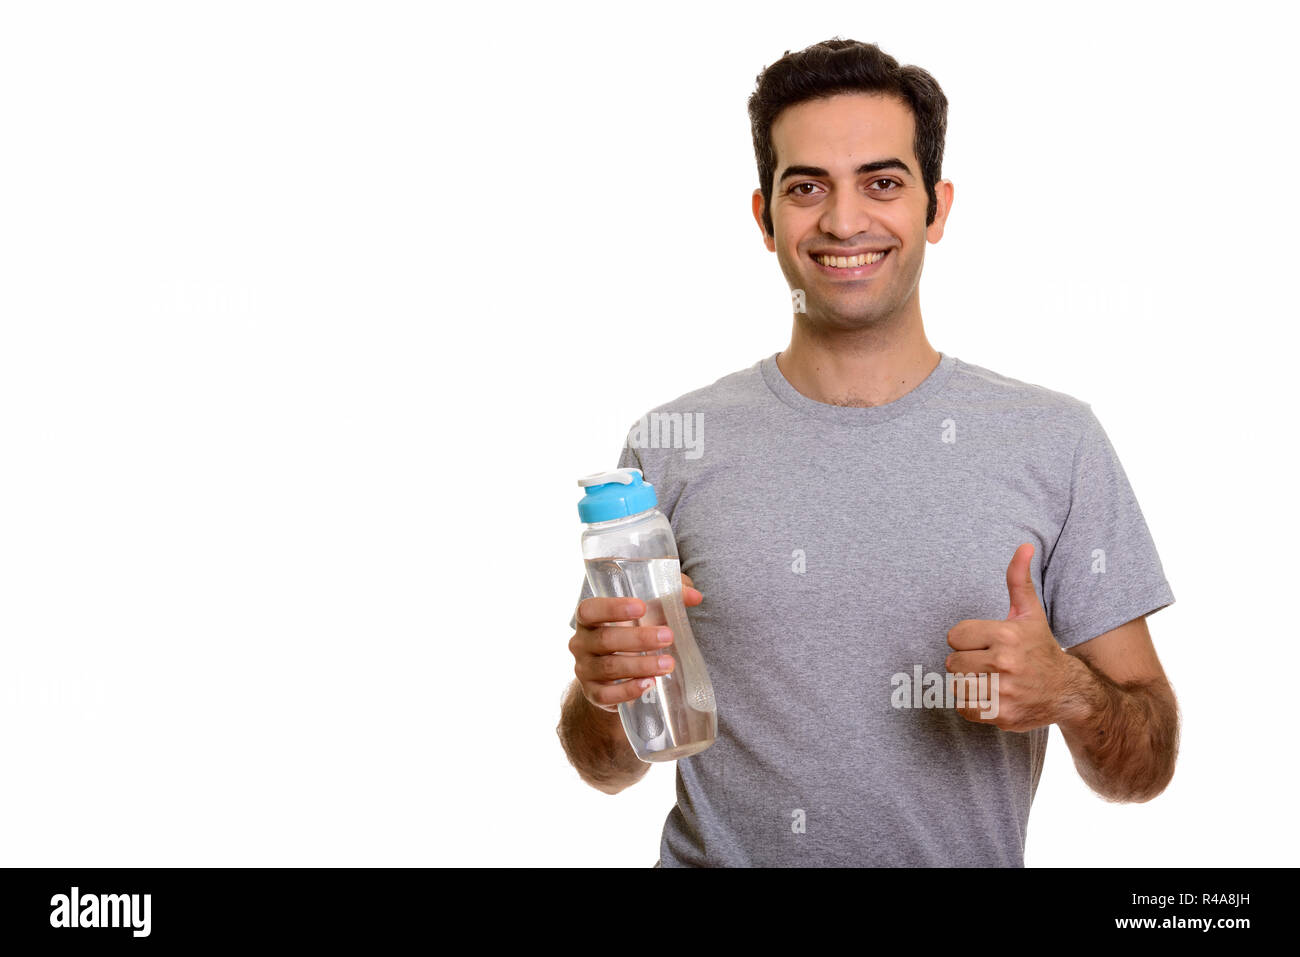 https://c8.alamy.com/comp/R4A8JH/young-happy-persian-man-holding-water-bottle-and-giving-thumb-up-R4A8JH.jpg